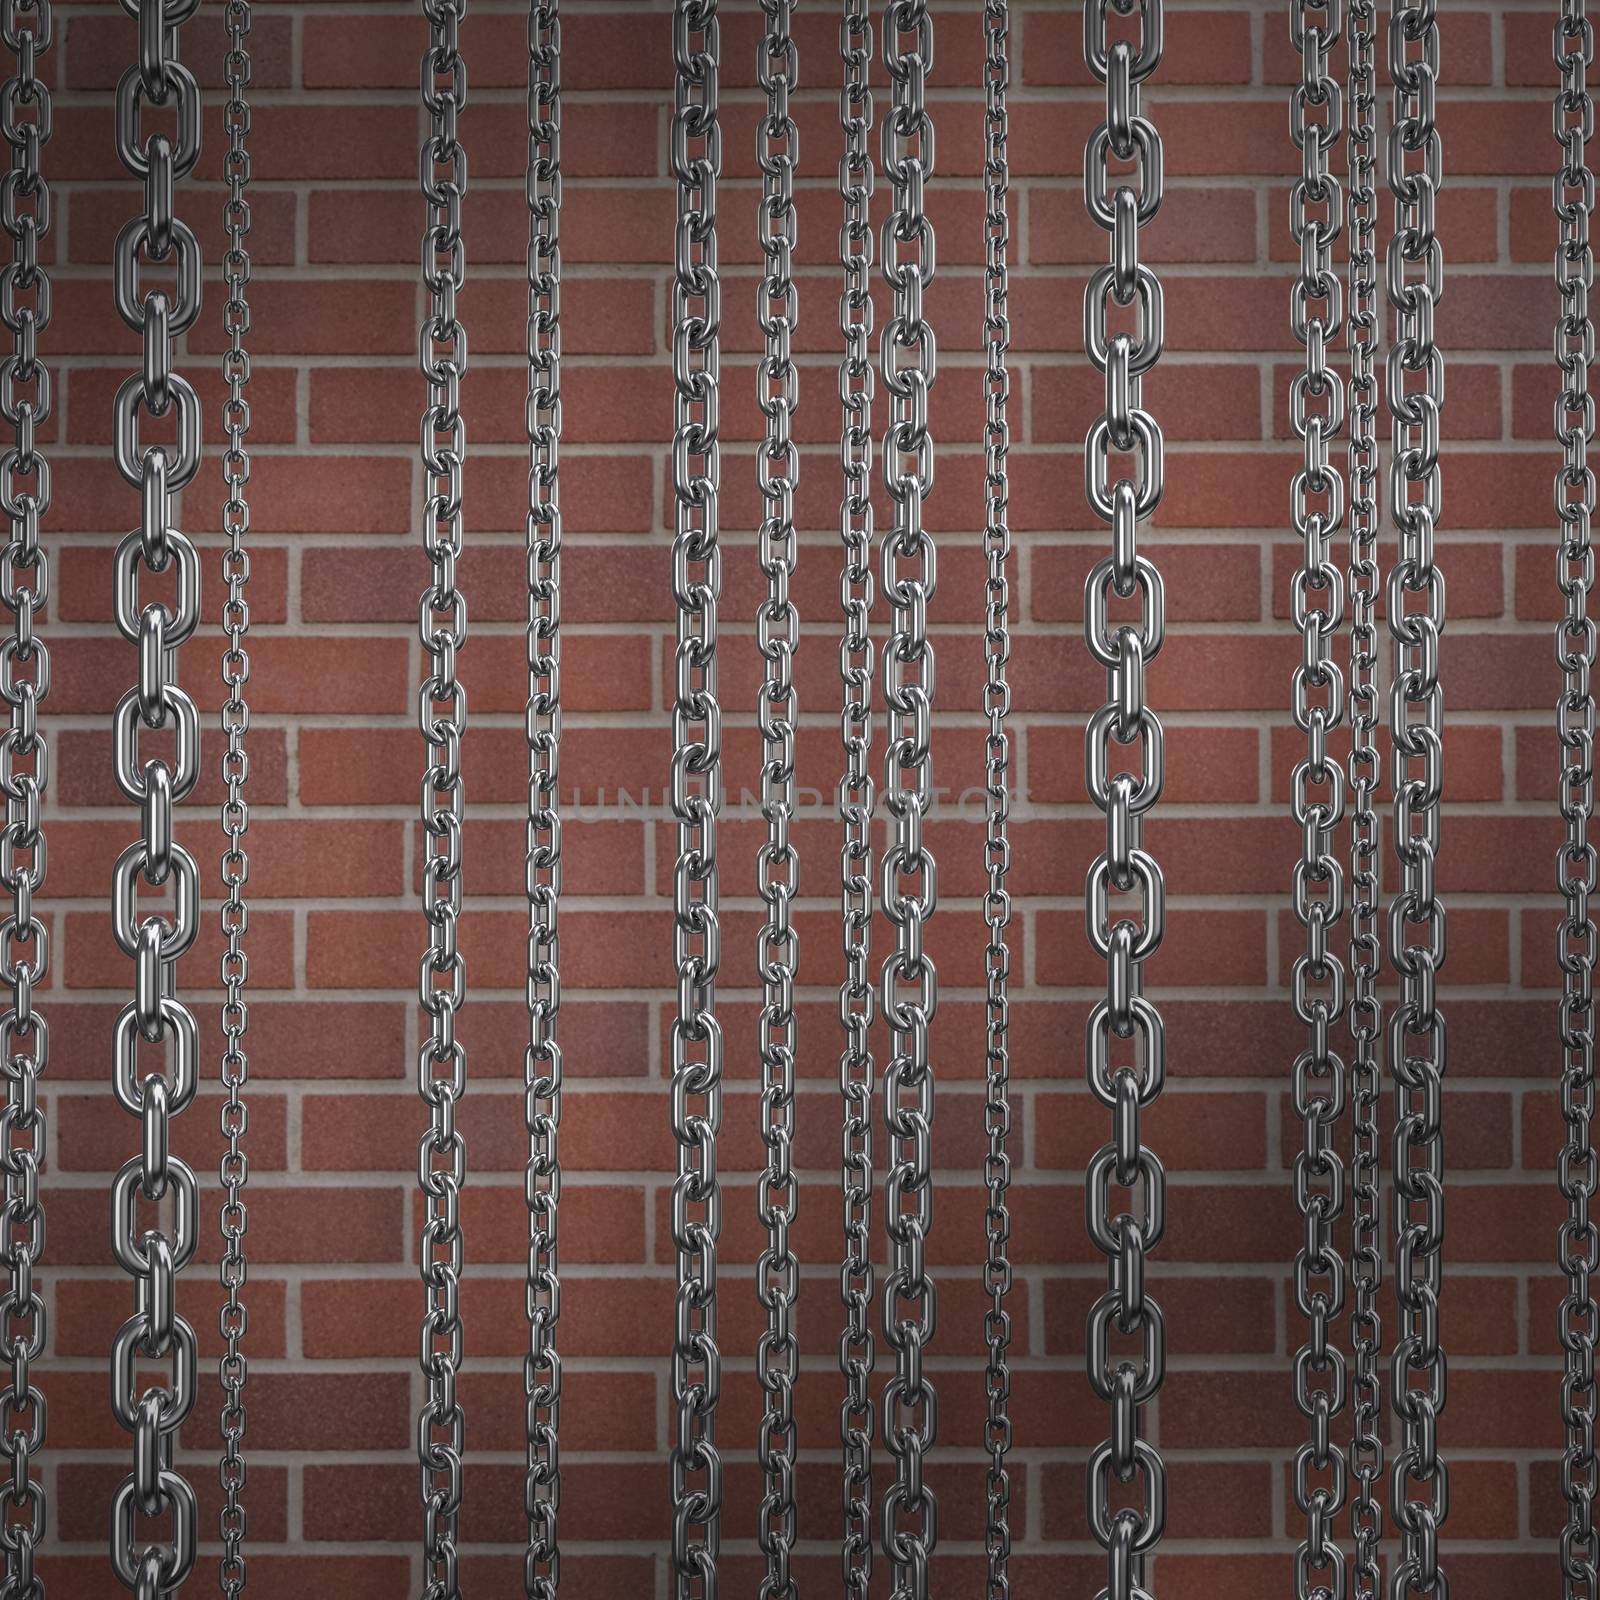 Row of silver metallic chains  against full frame shot of wall